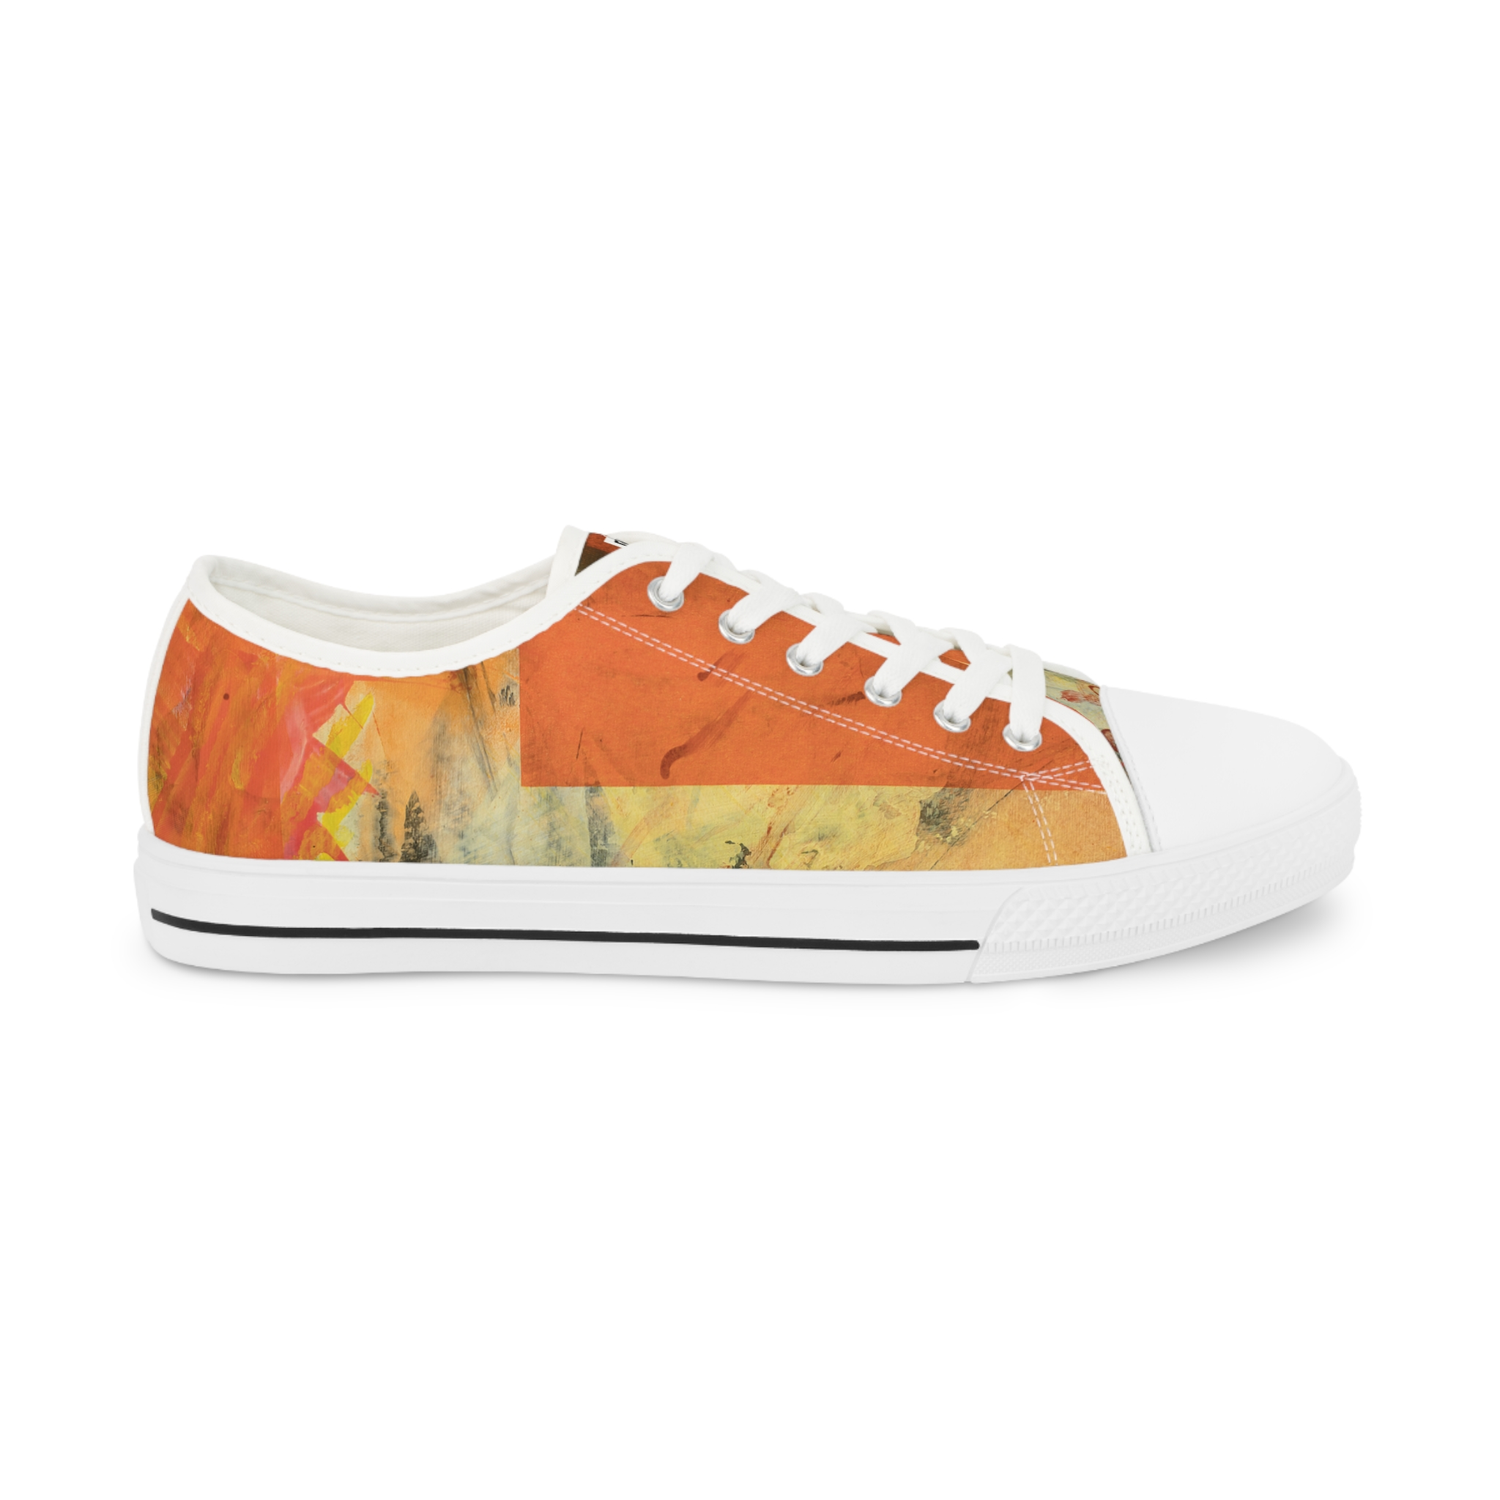 Women's Low Top Patterned Canvas Sneakers